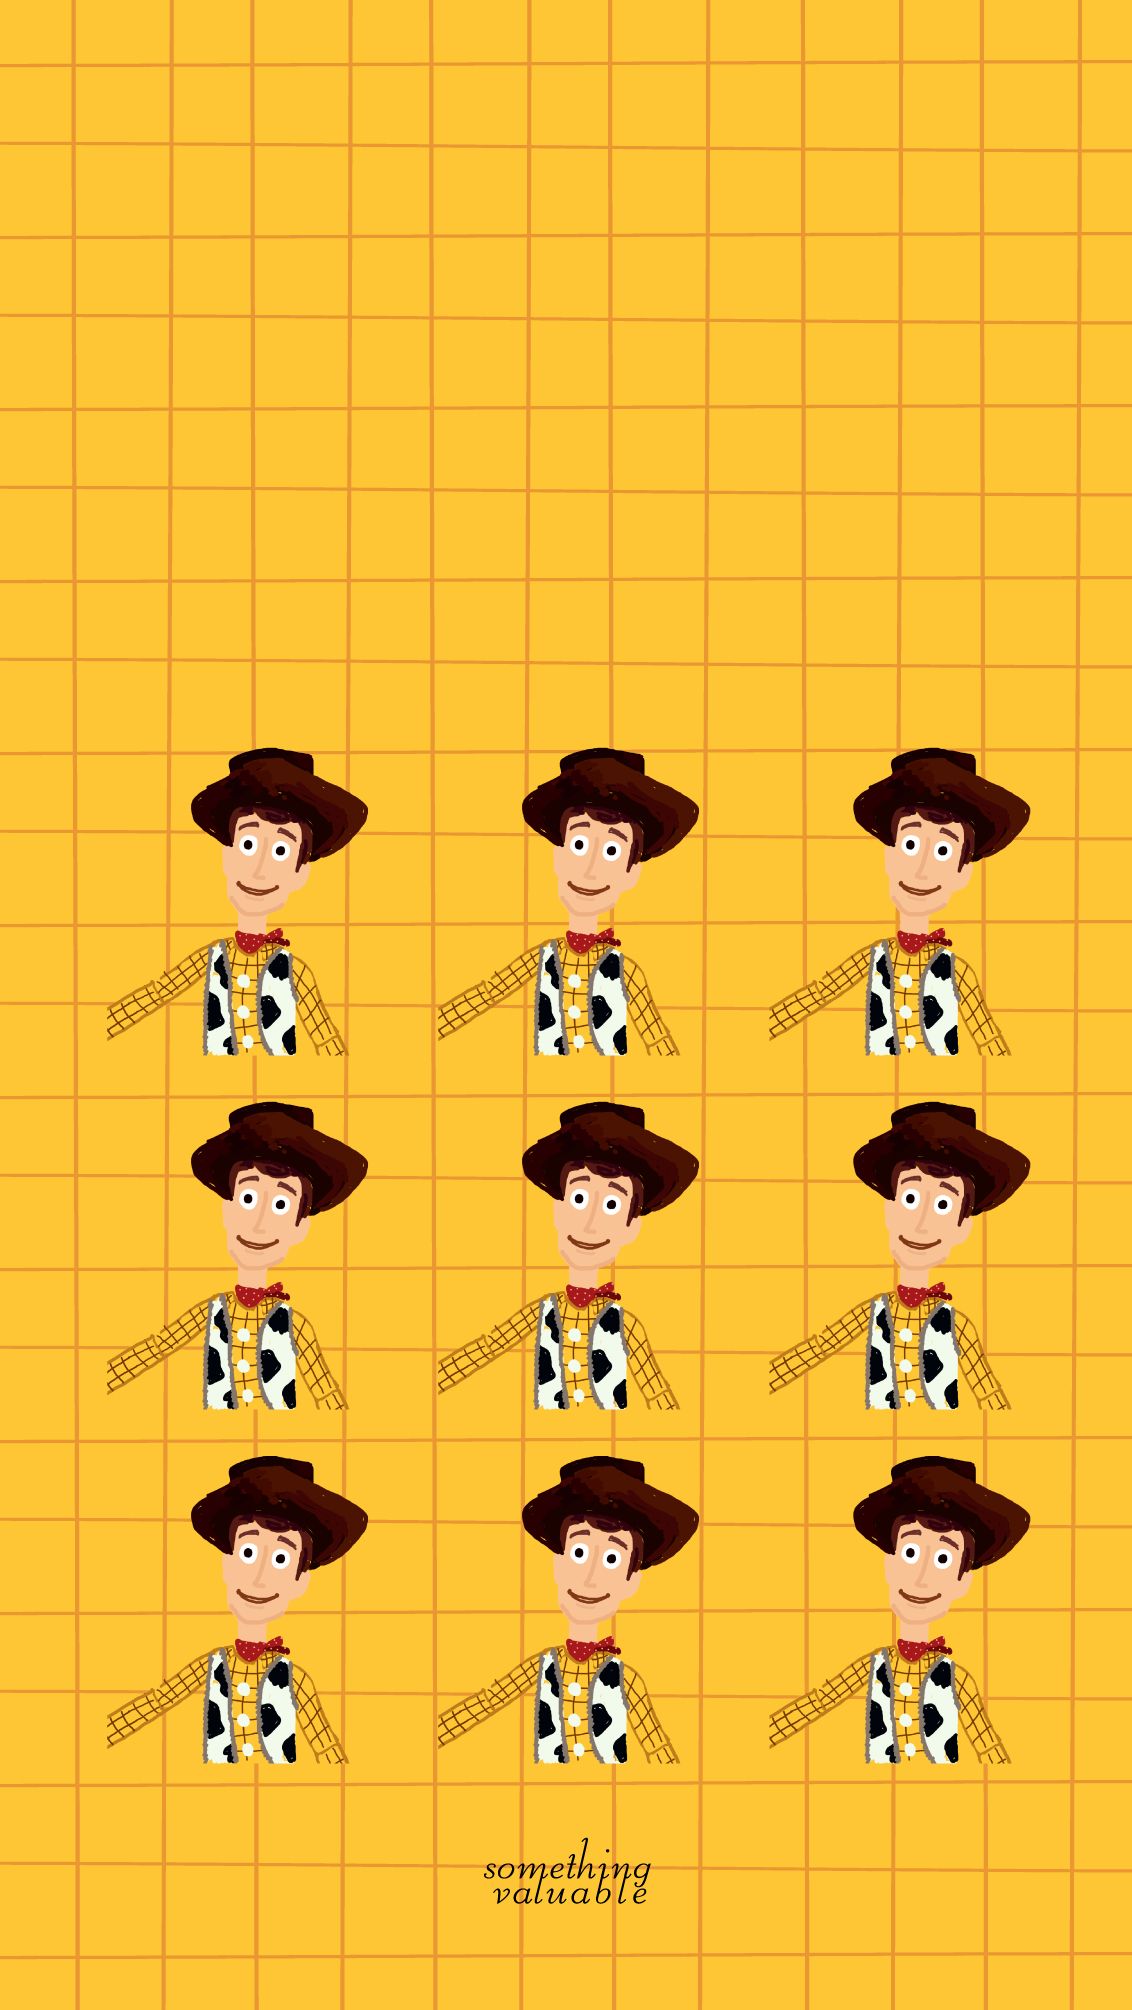 iPhone wallpaper design • toystory woody